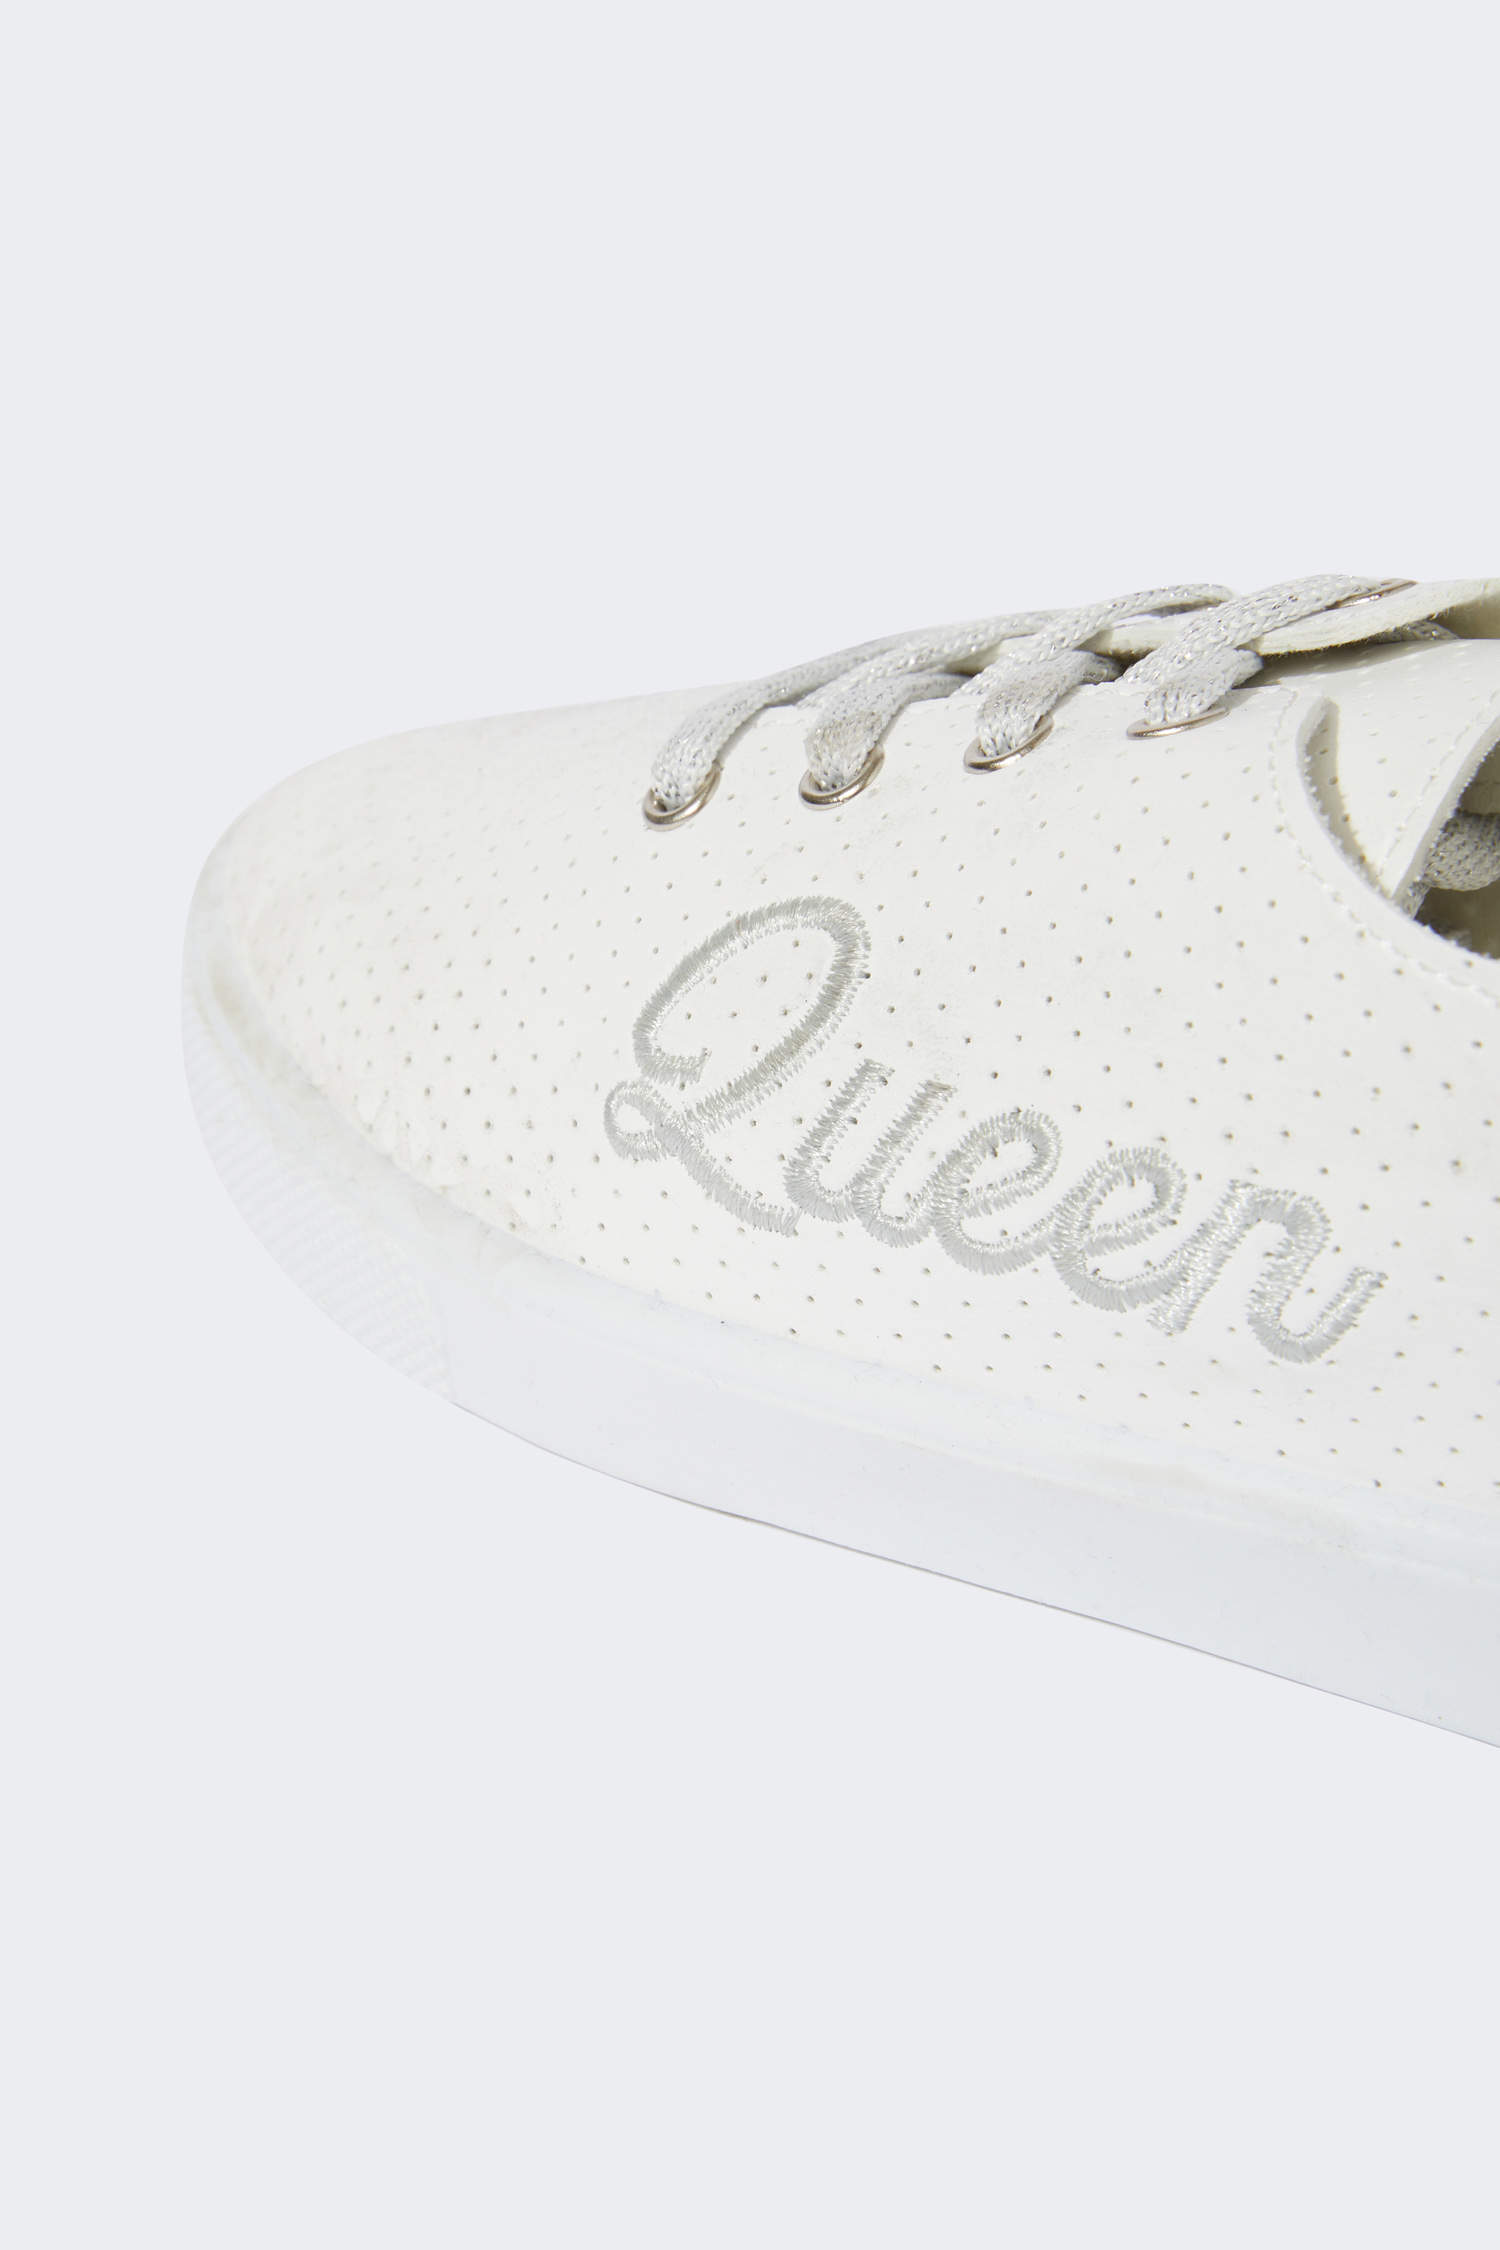 Ladies Elle Sport White Lace Up Trainers - F7188